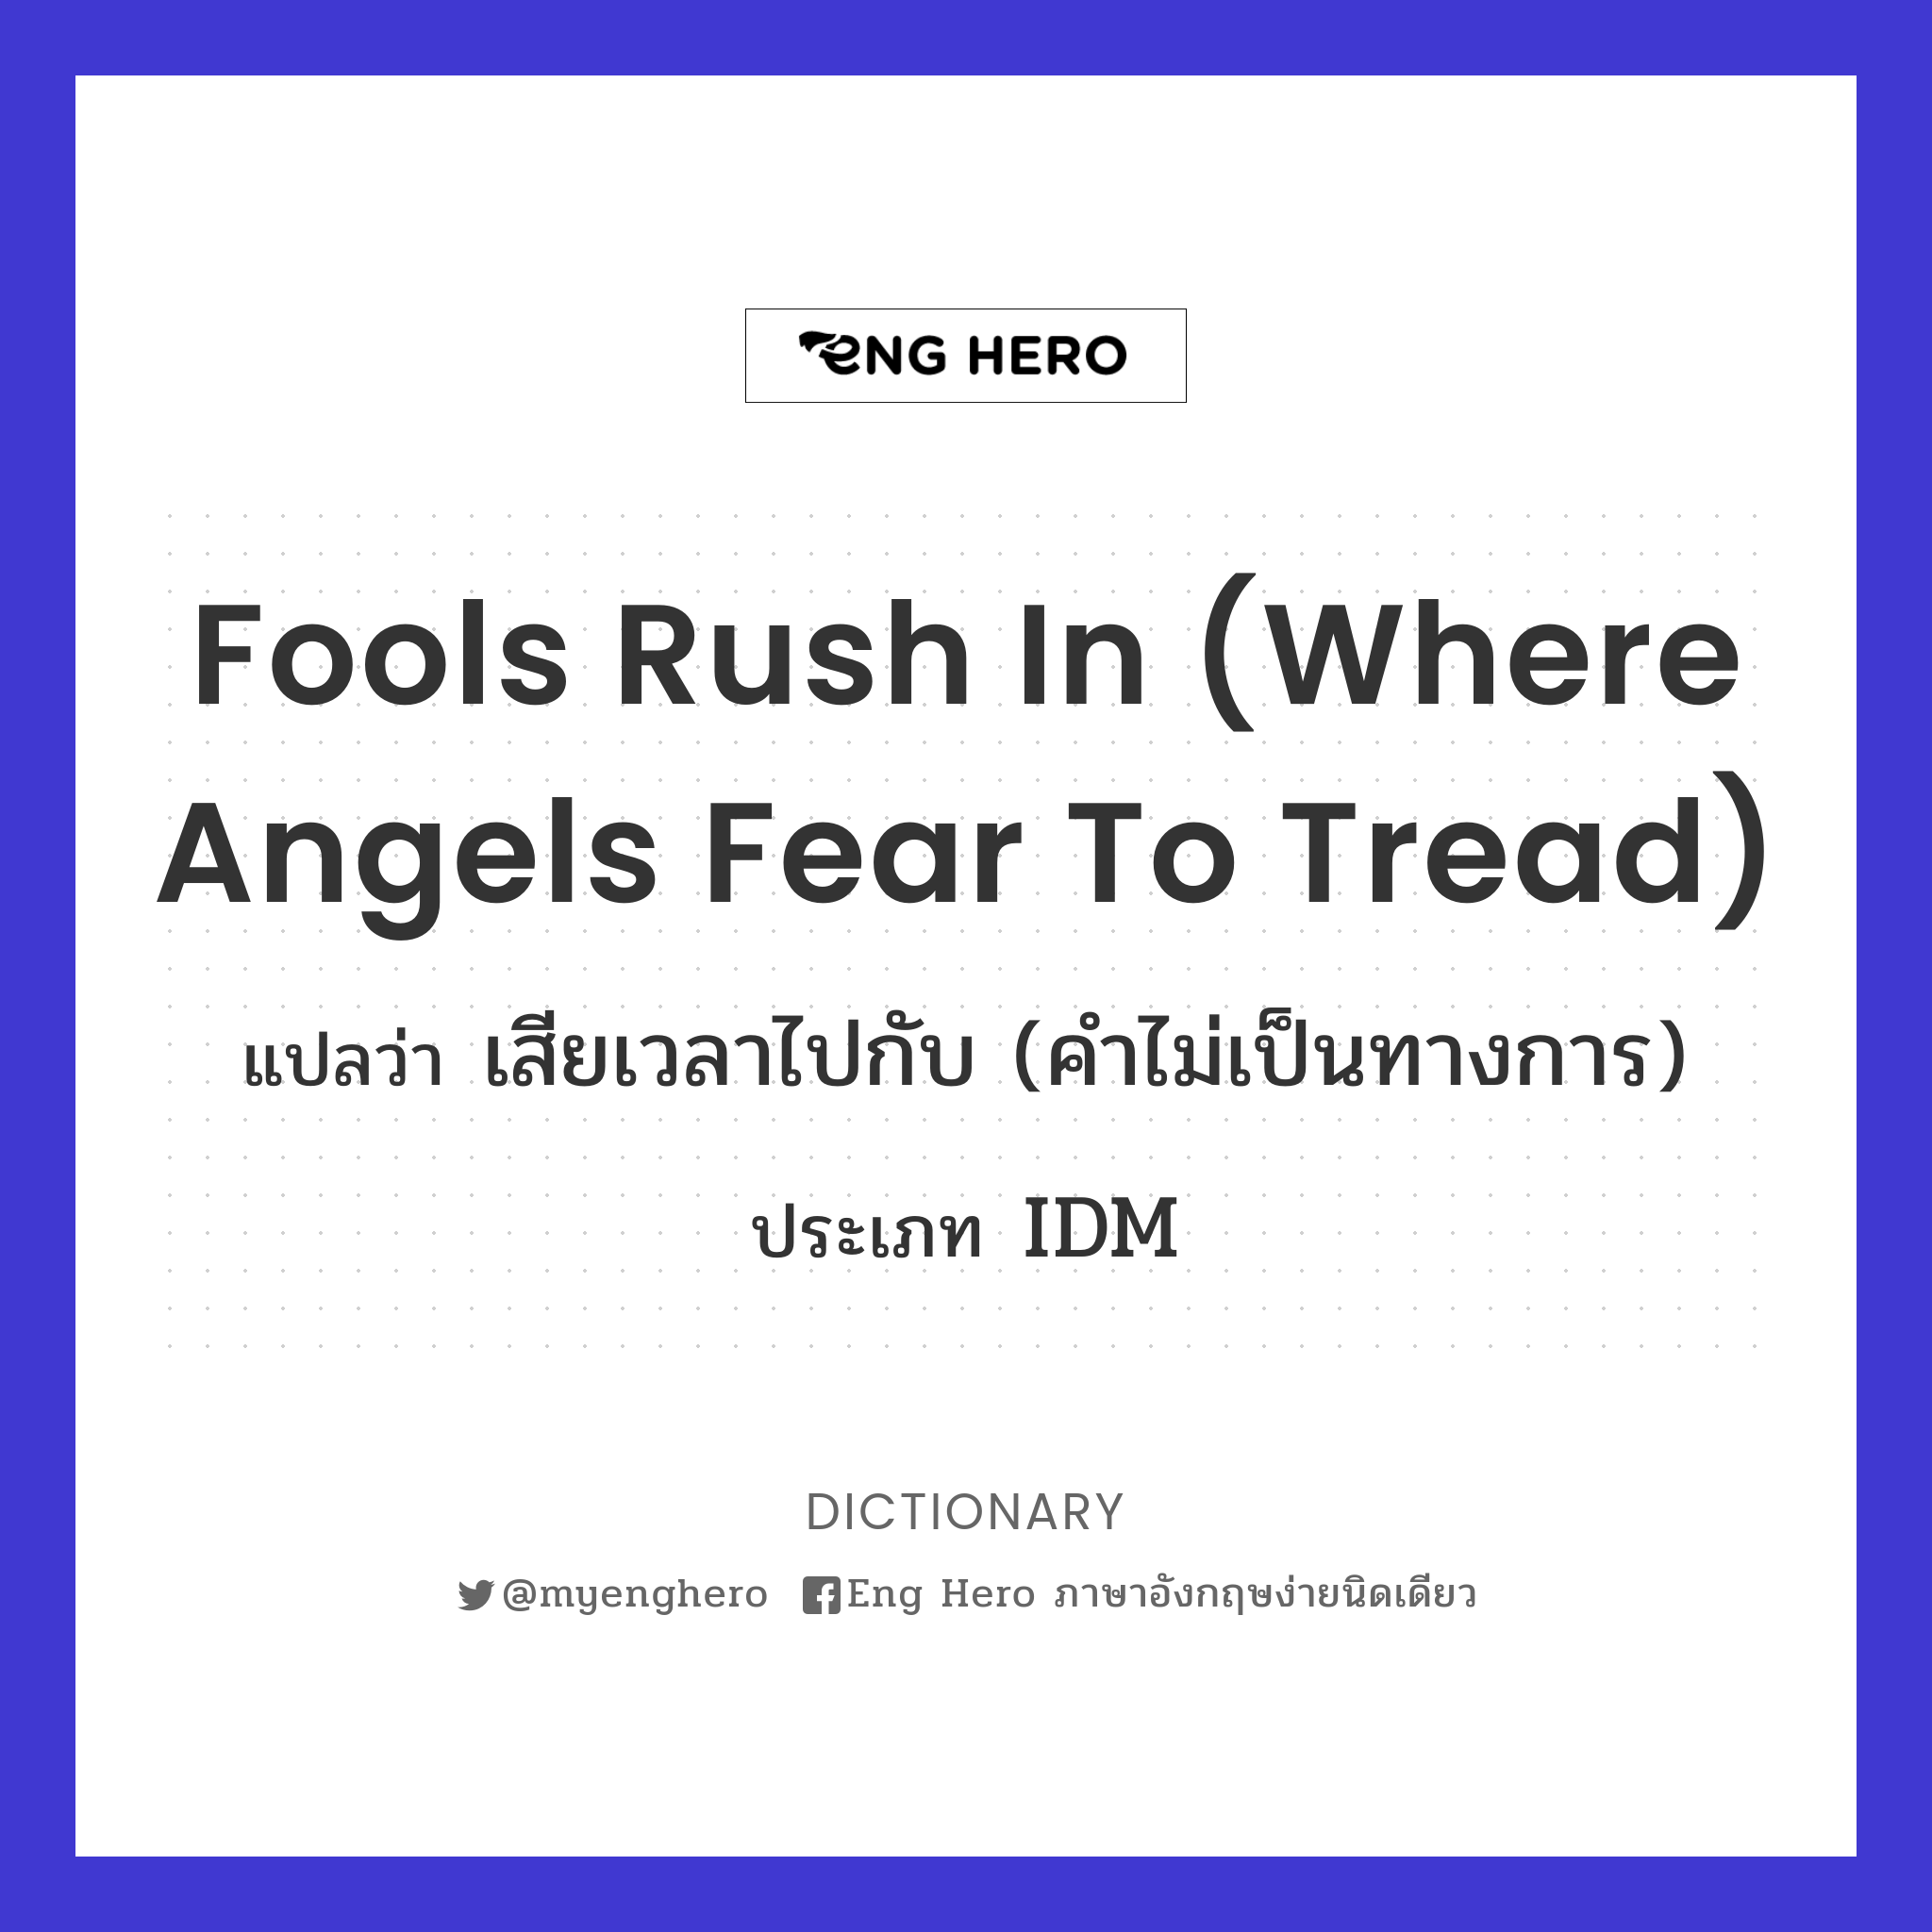 fools rush in (where angels fear to tread)